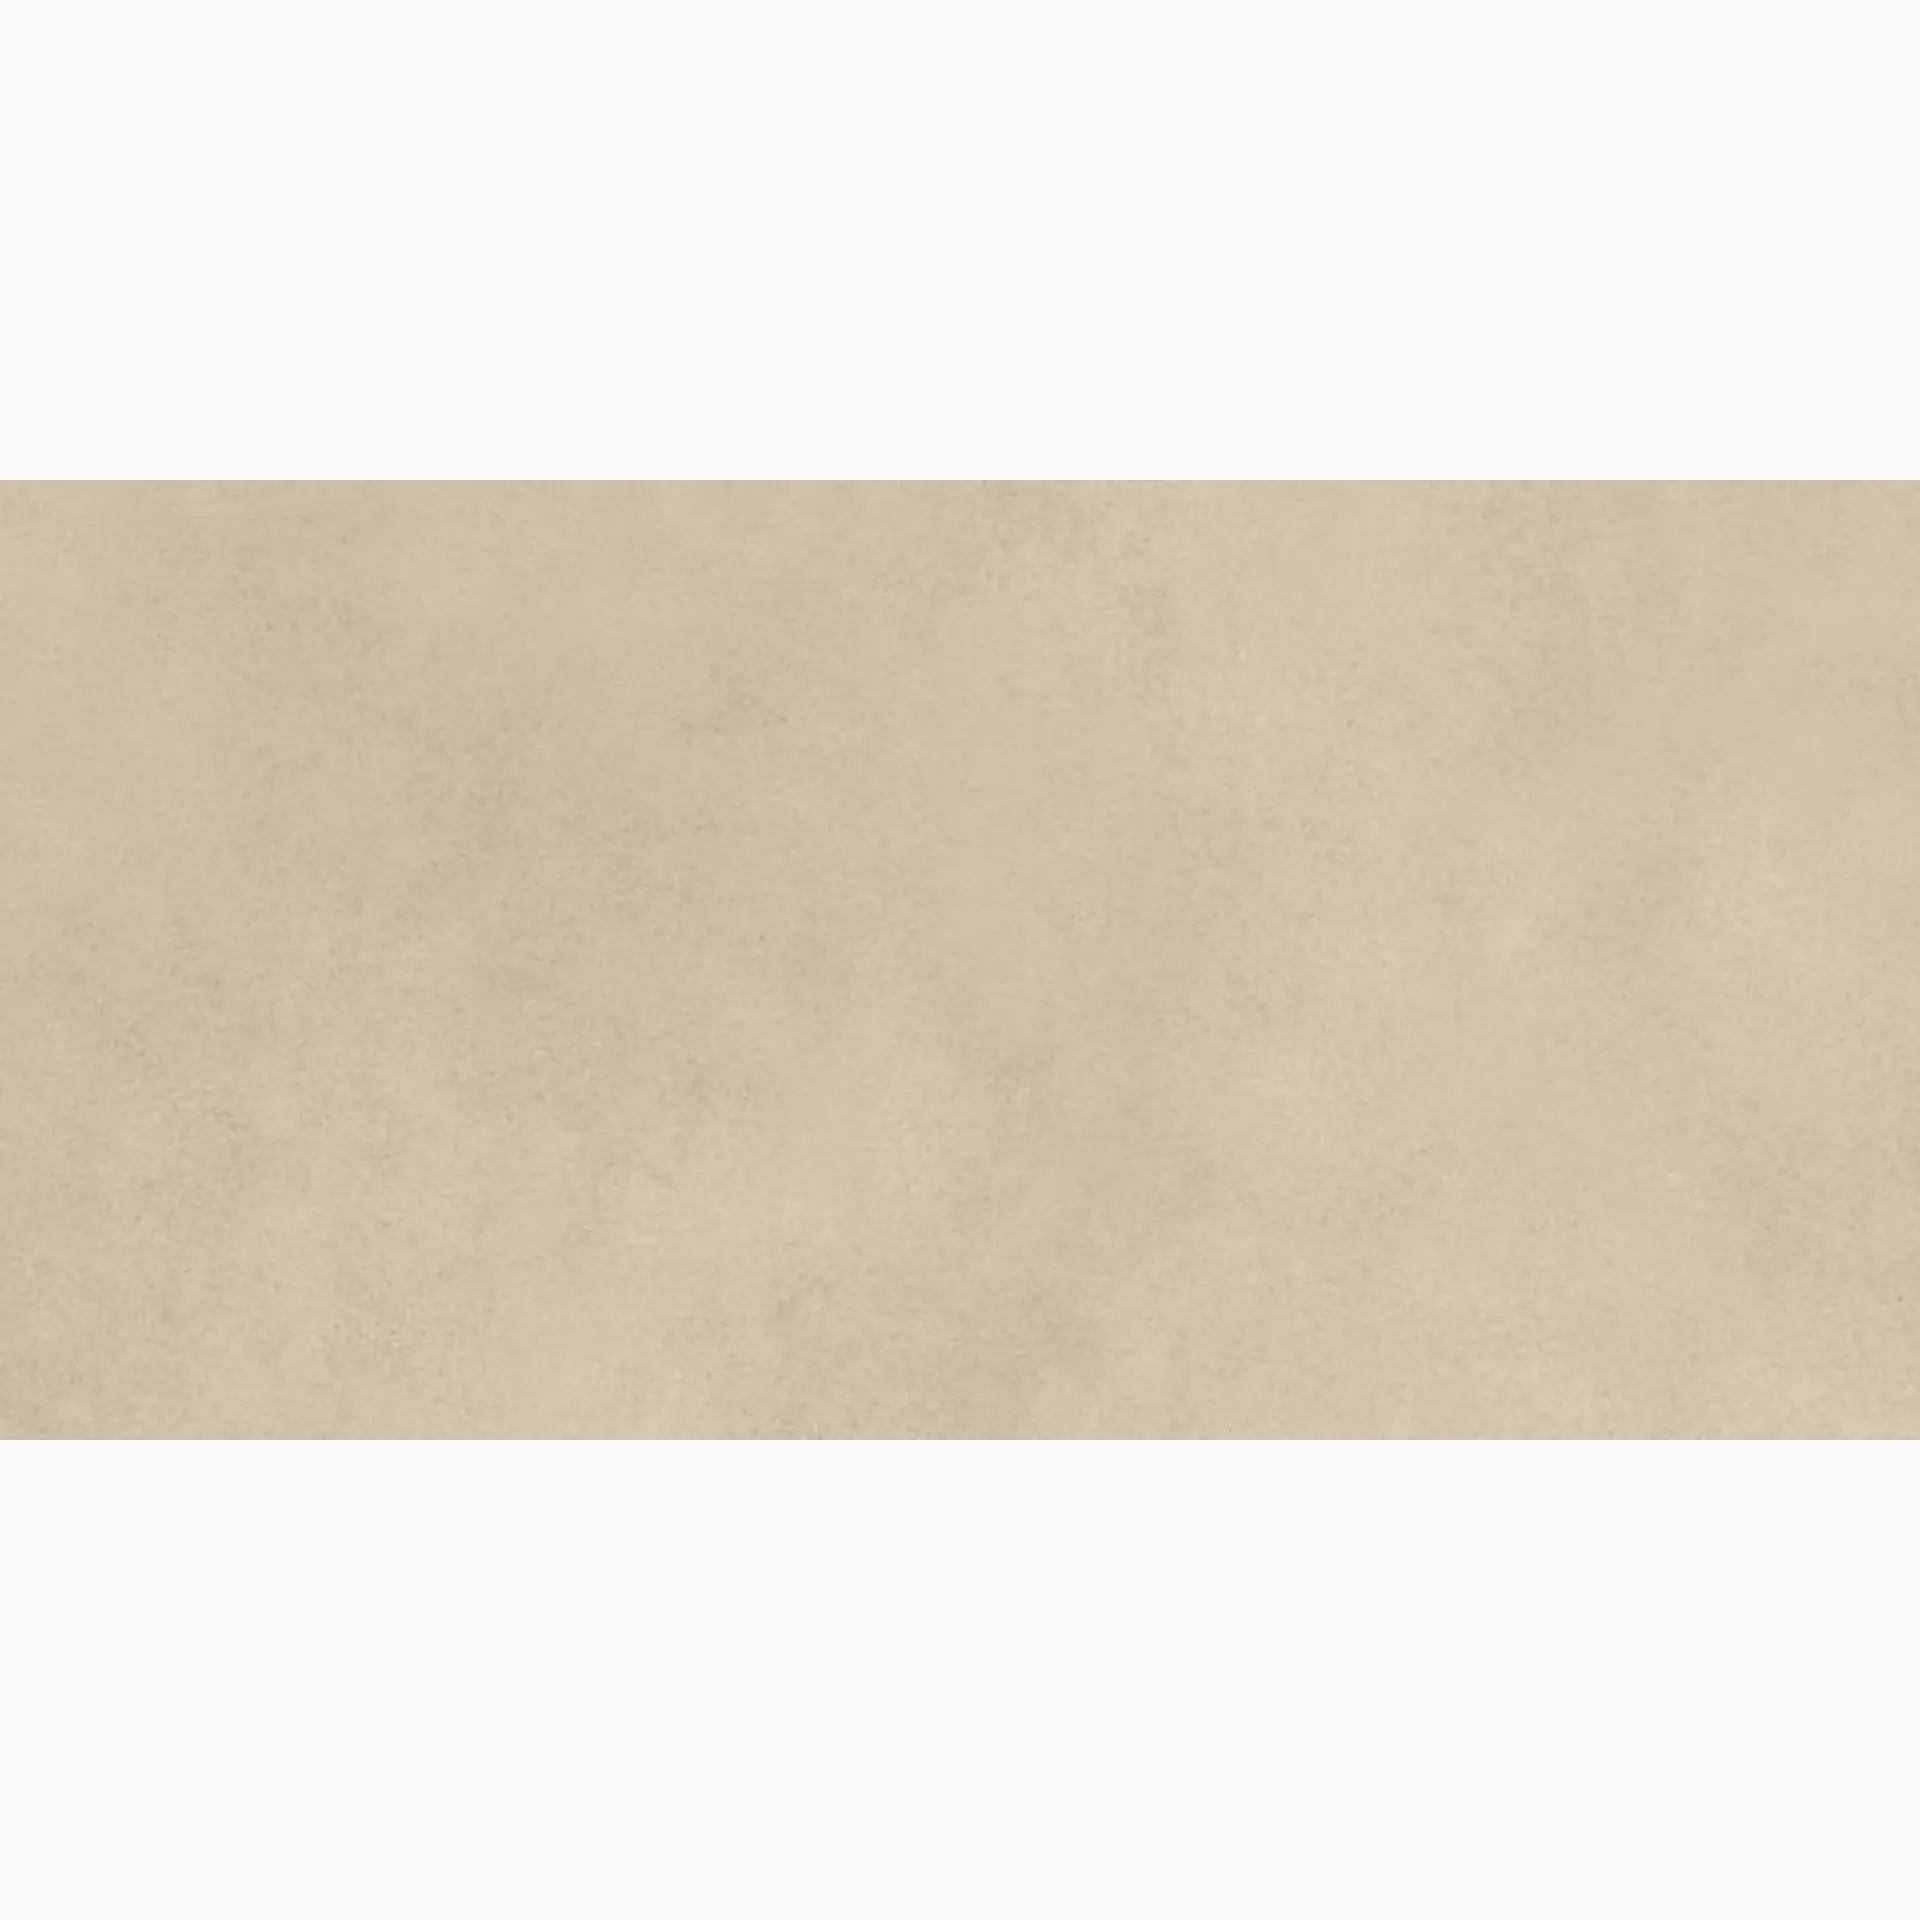 Sant Agostino Sable Beige Antislip CSASABE212 60x120cm rectified 20mm